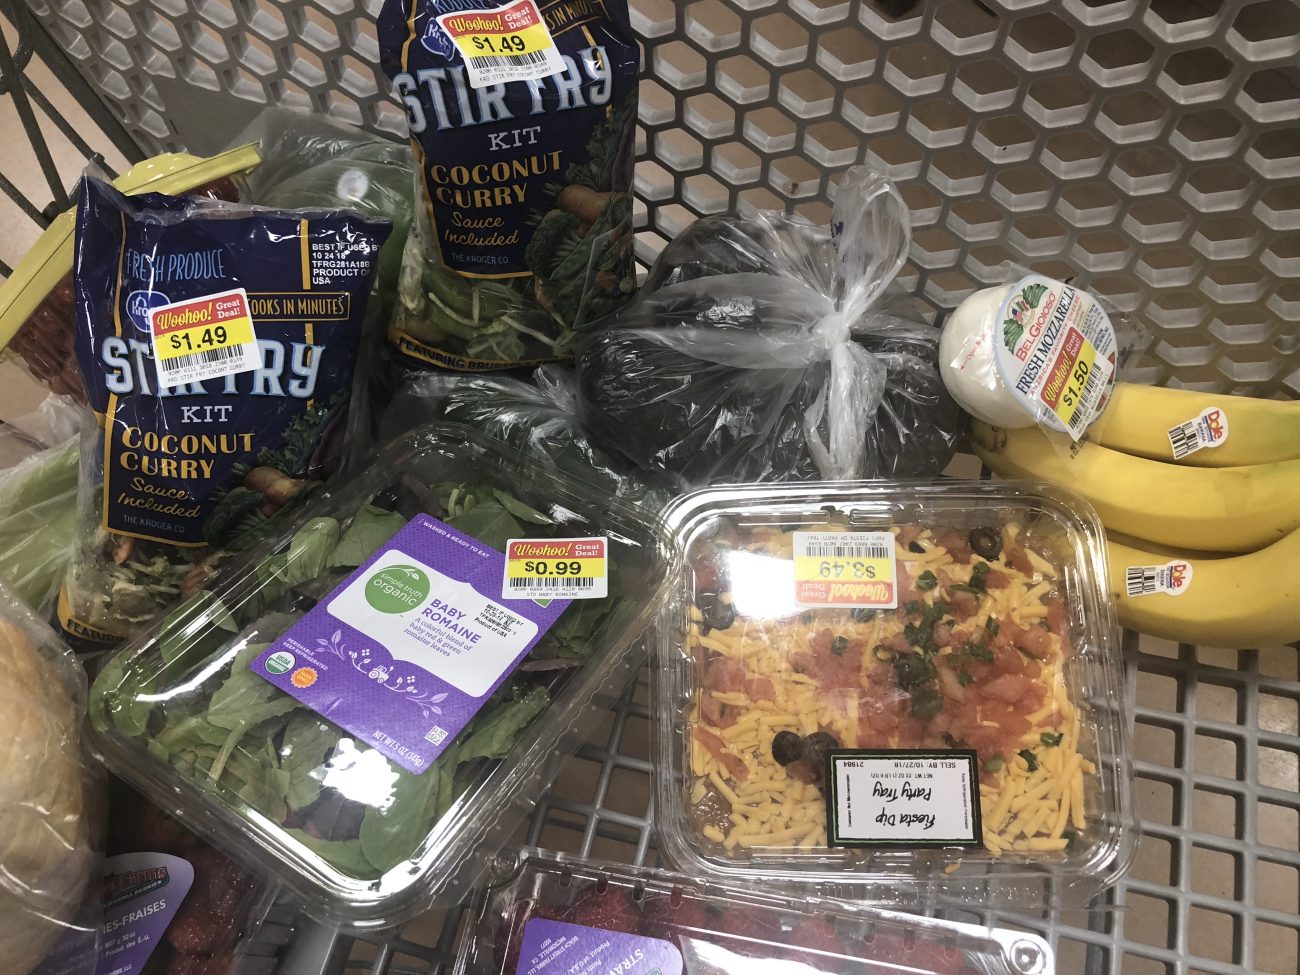 meal planning tips busy family – marked down items in a cart